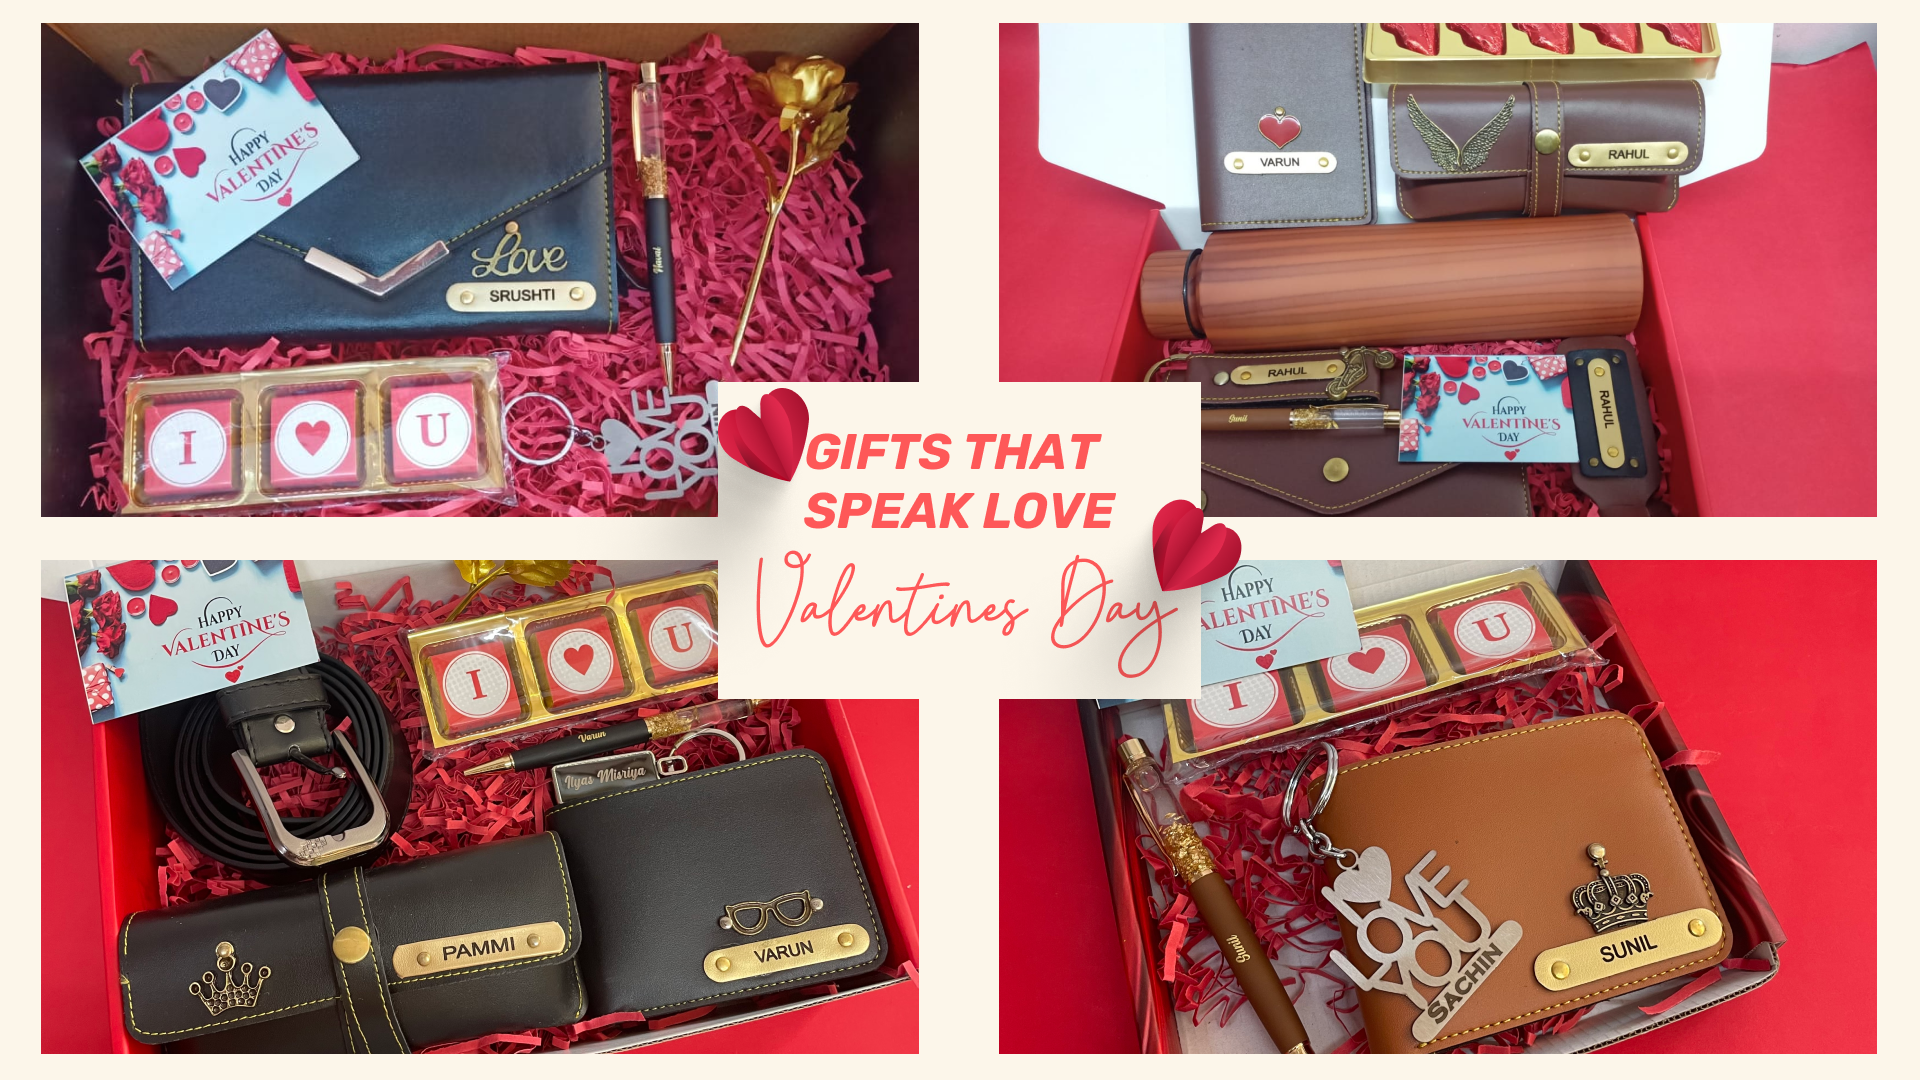 "Gifts that Speak Love: Valentine's Day Ideas for Your Special Someone"